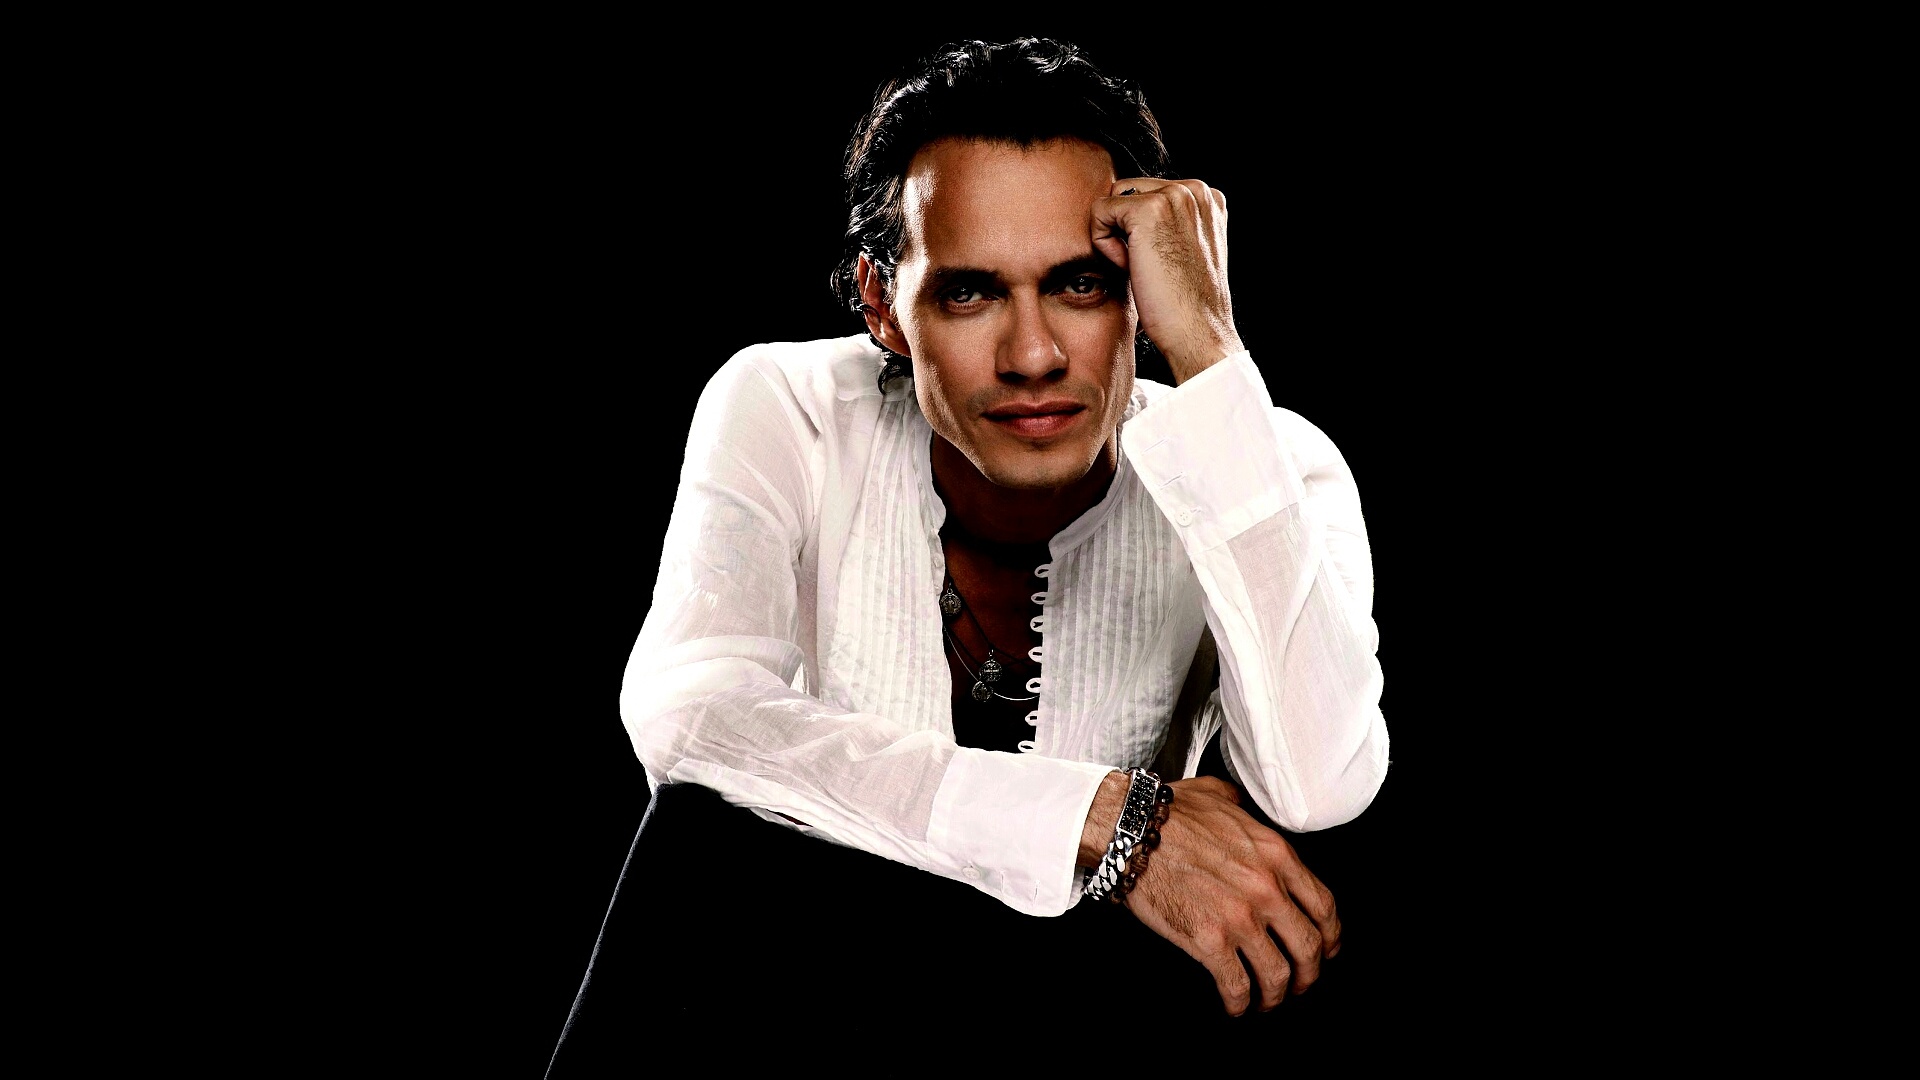 Marc Anthony, Live performances, Energetic stage presence, Timeless melodies, 1920x1080 Full HD Desktop